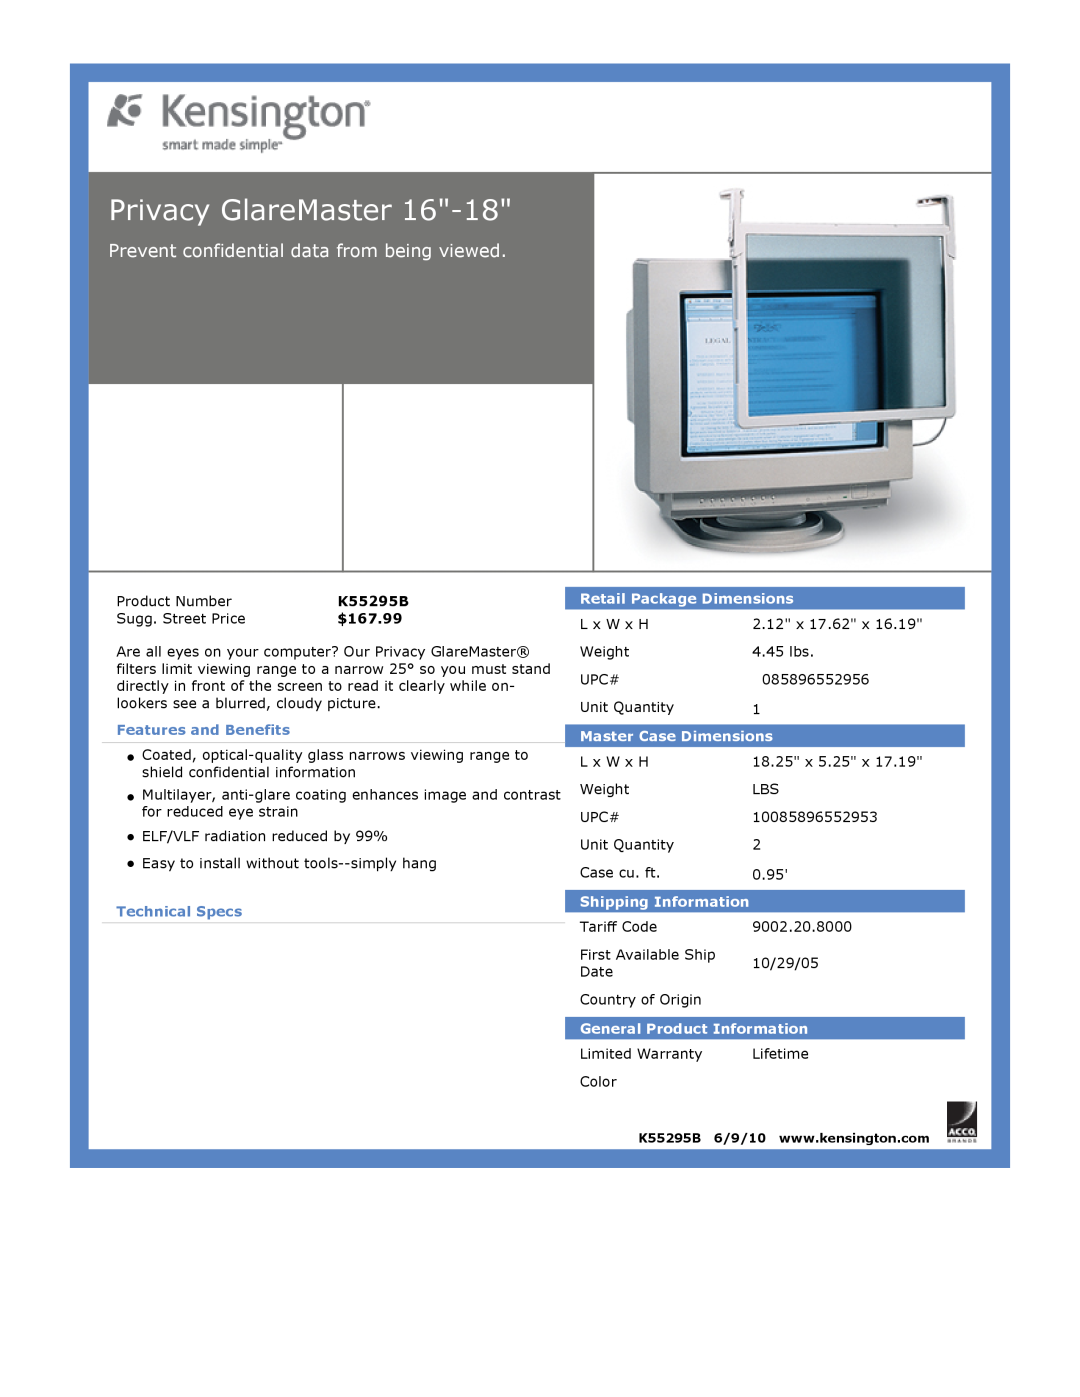 Kensington EU64325 Privacy GlareMaster, Prevent confidential data from being viewed, $167.99, Features and Benefits 